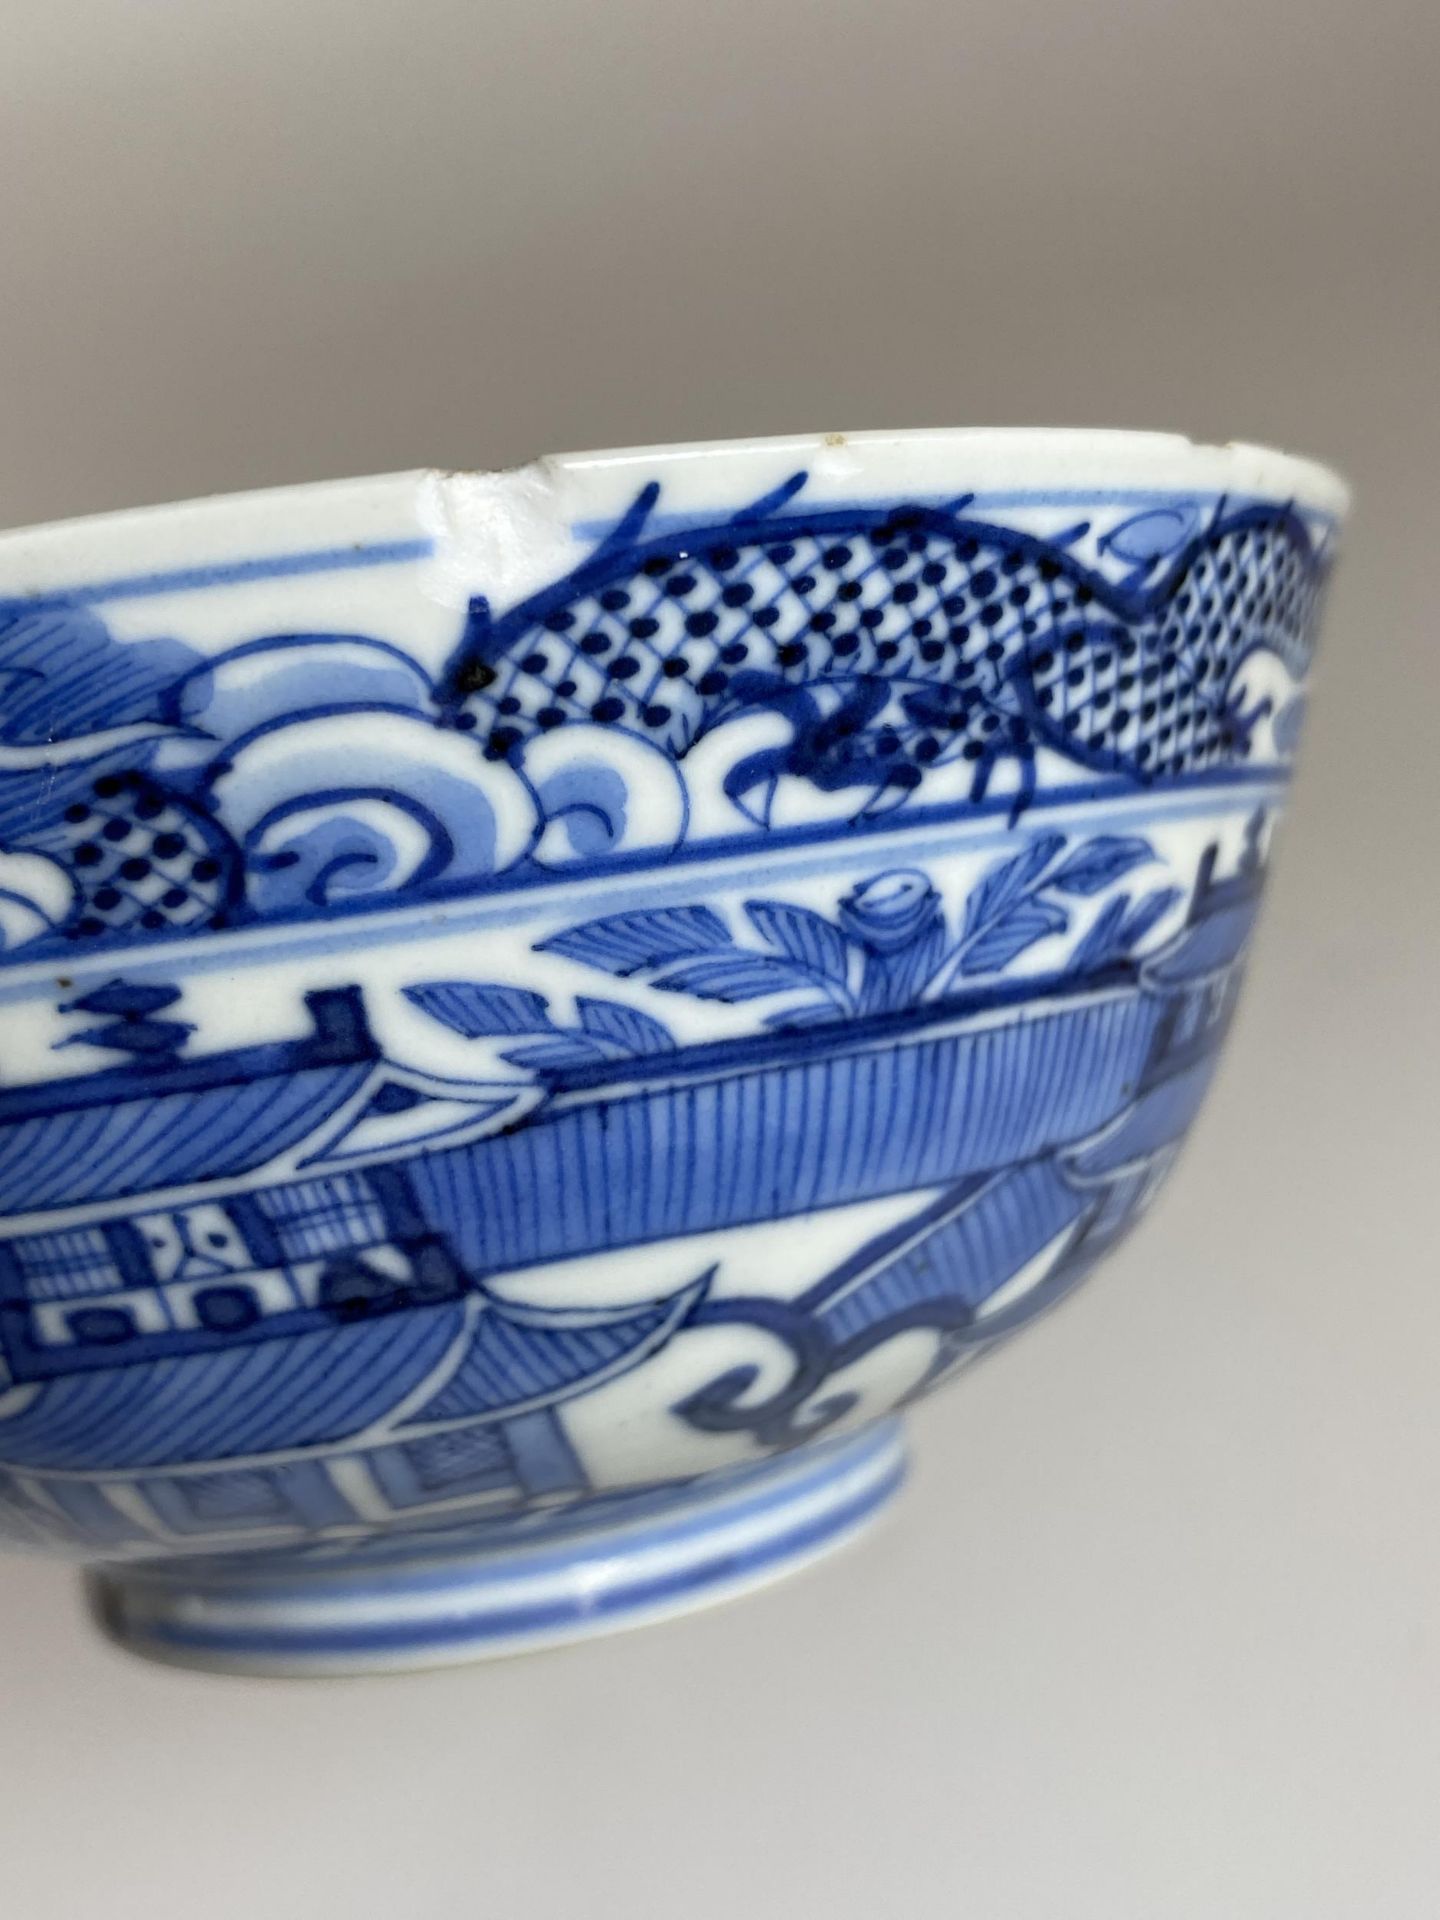 A LATE 19TH CENTURY CHINESE KANGXI REVIVAL BLUE AND WHITE PORCELAIN BOWL WITH DRAGON IN THE CLOUDS - Image 5 of 7